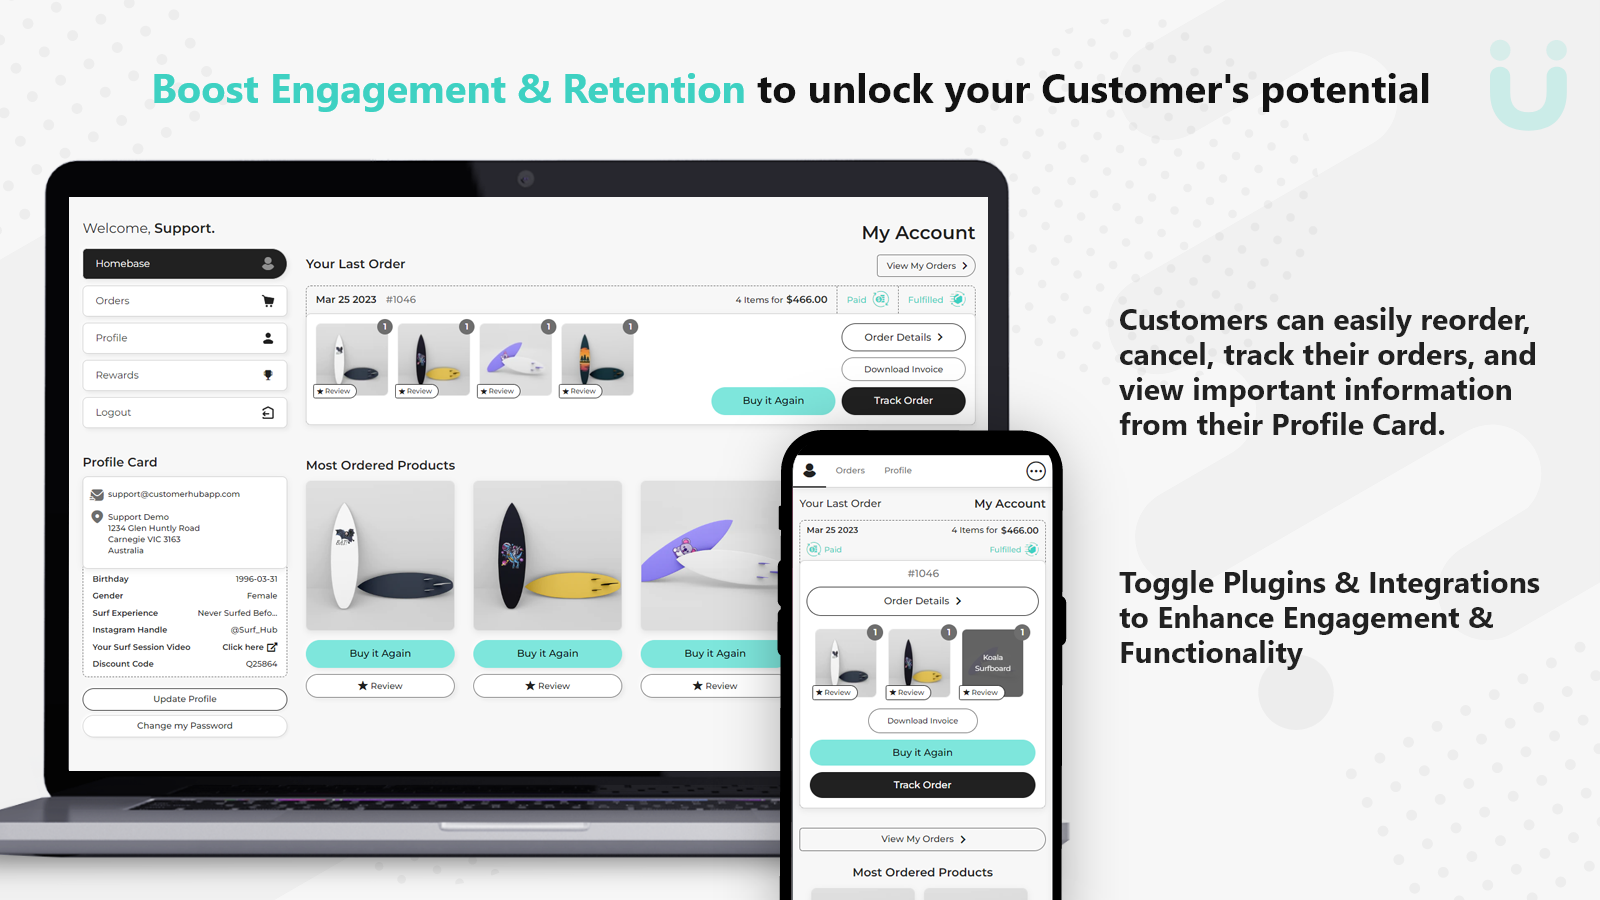 Boost Engagement & Retention to unlock your Customer's potential